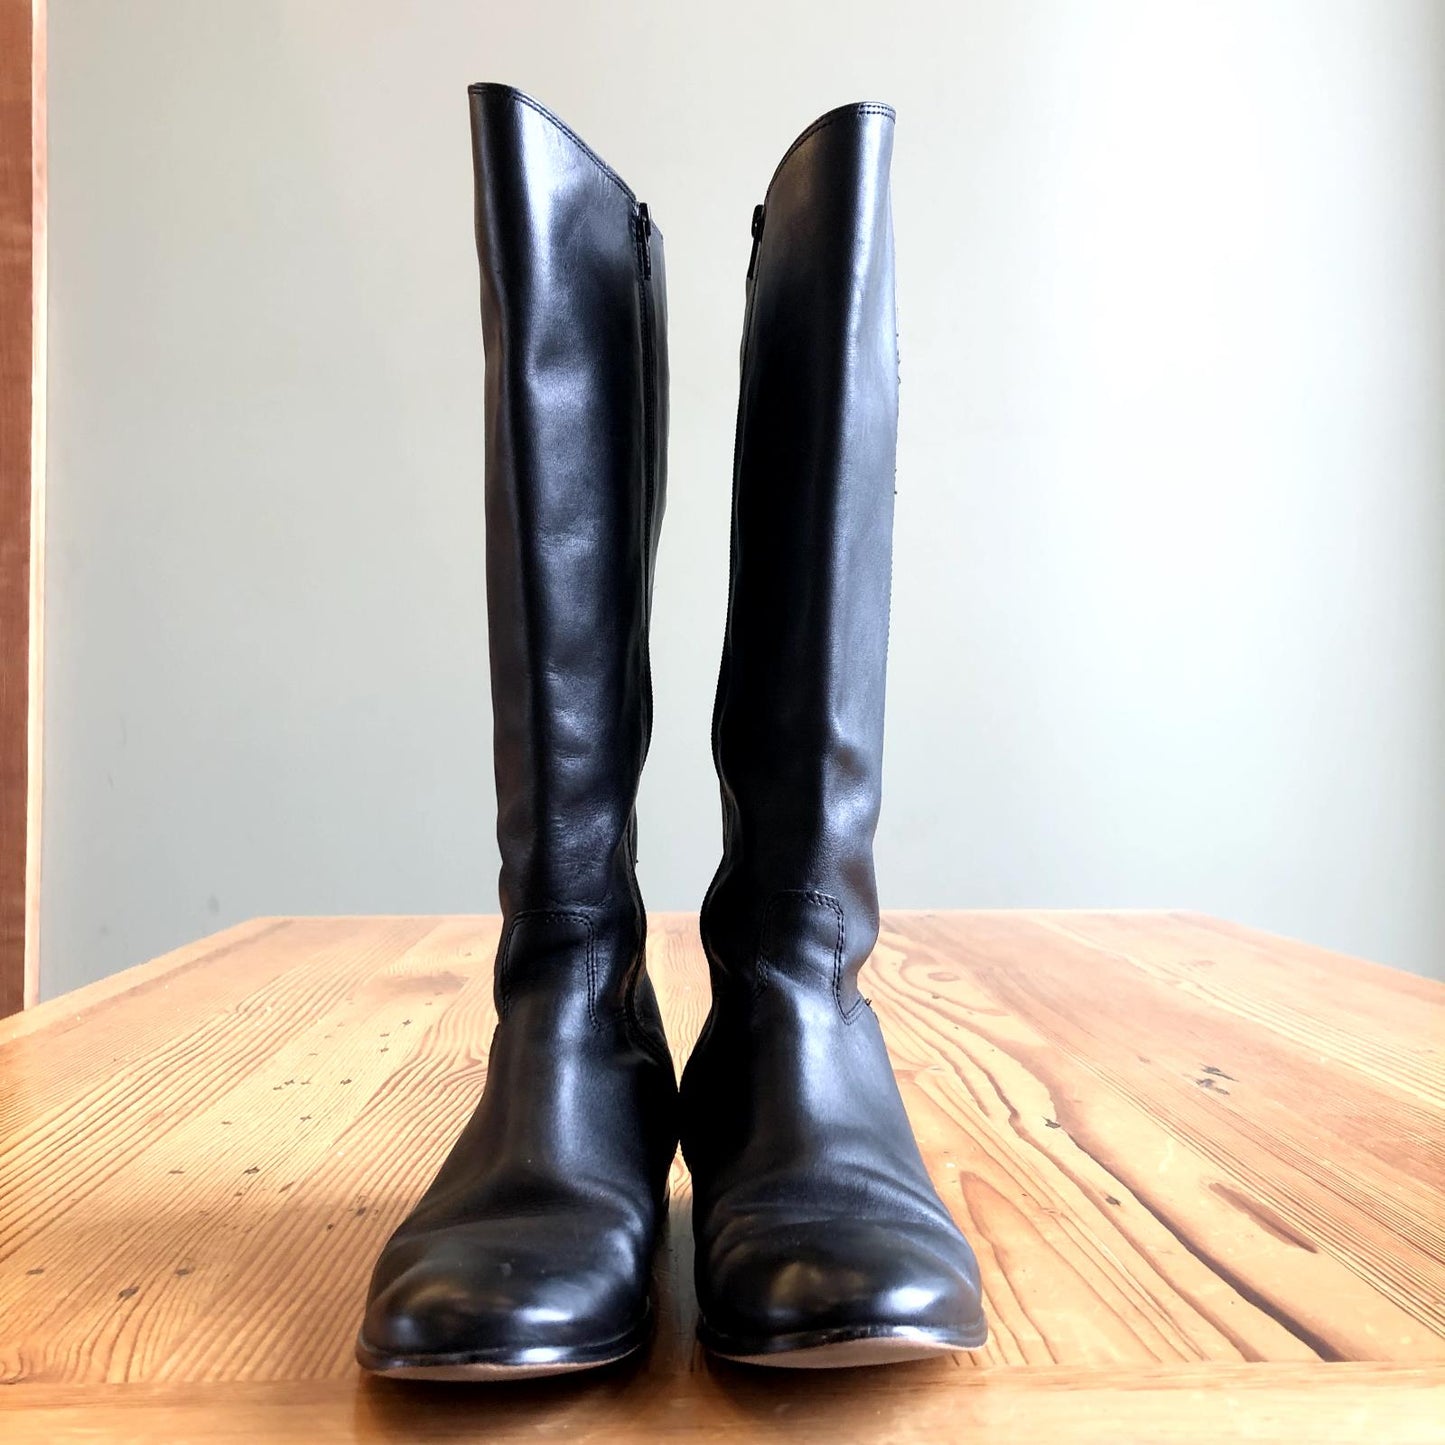 6 - Corso Como Anthropologie Black Leather Flat Knee High Boots 0606SP